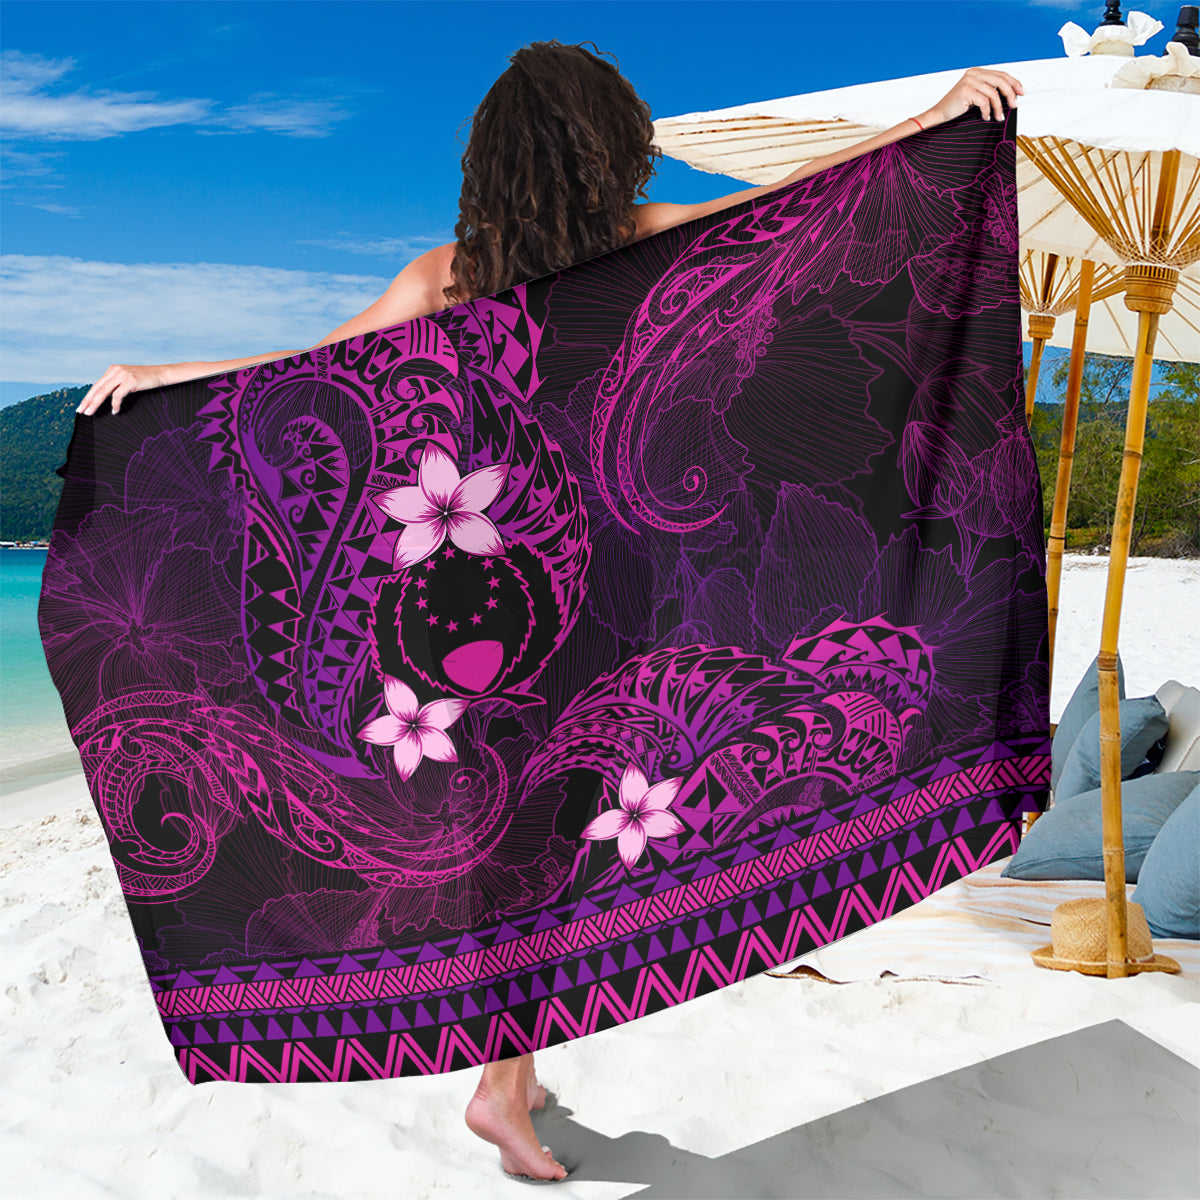 FSM Pohnpei State Sarong Tribal Pattern Pink Version LT01 One Size 44 x 66 inches Pink - Polynesian Pride